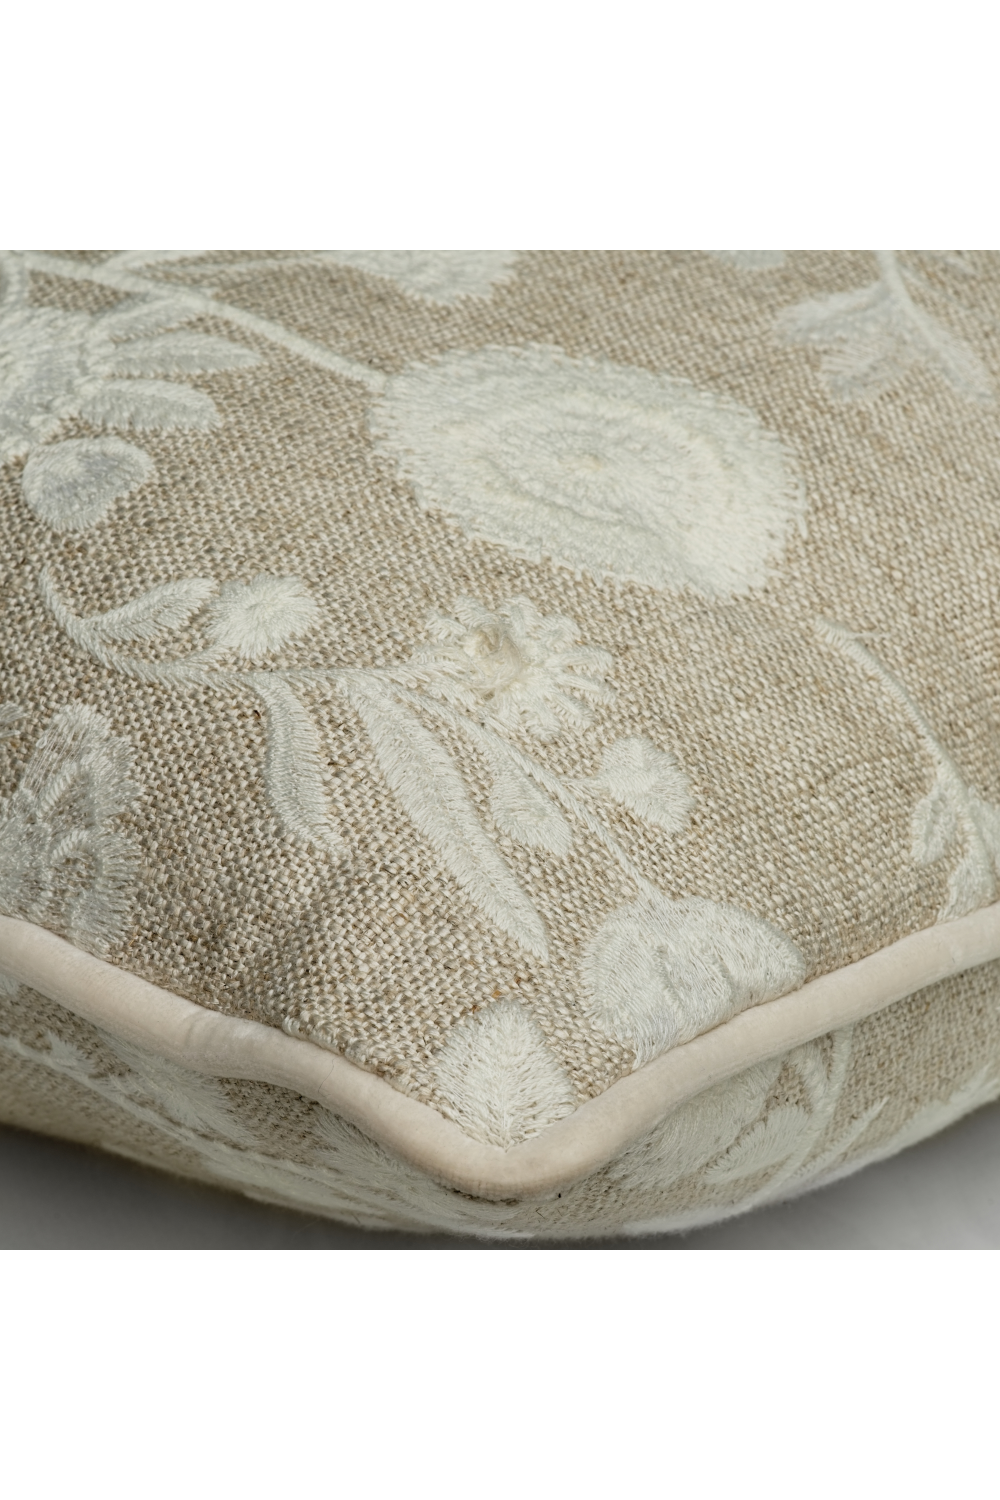 Floral Embroidered Cushion | Andrew Martin Fable | Oroa.com